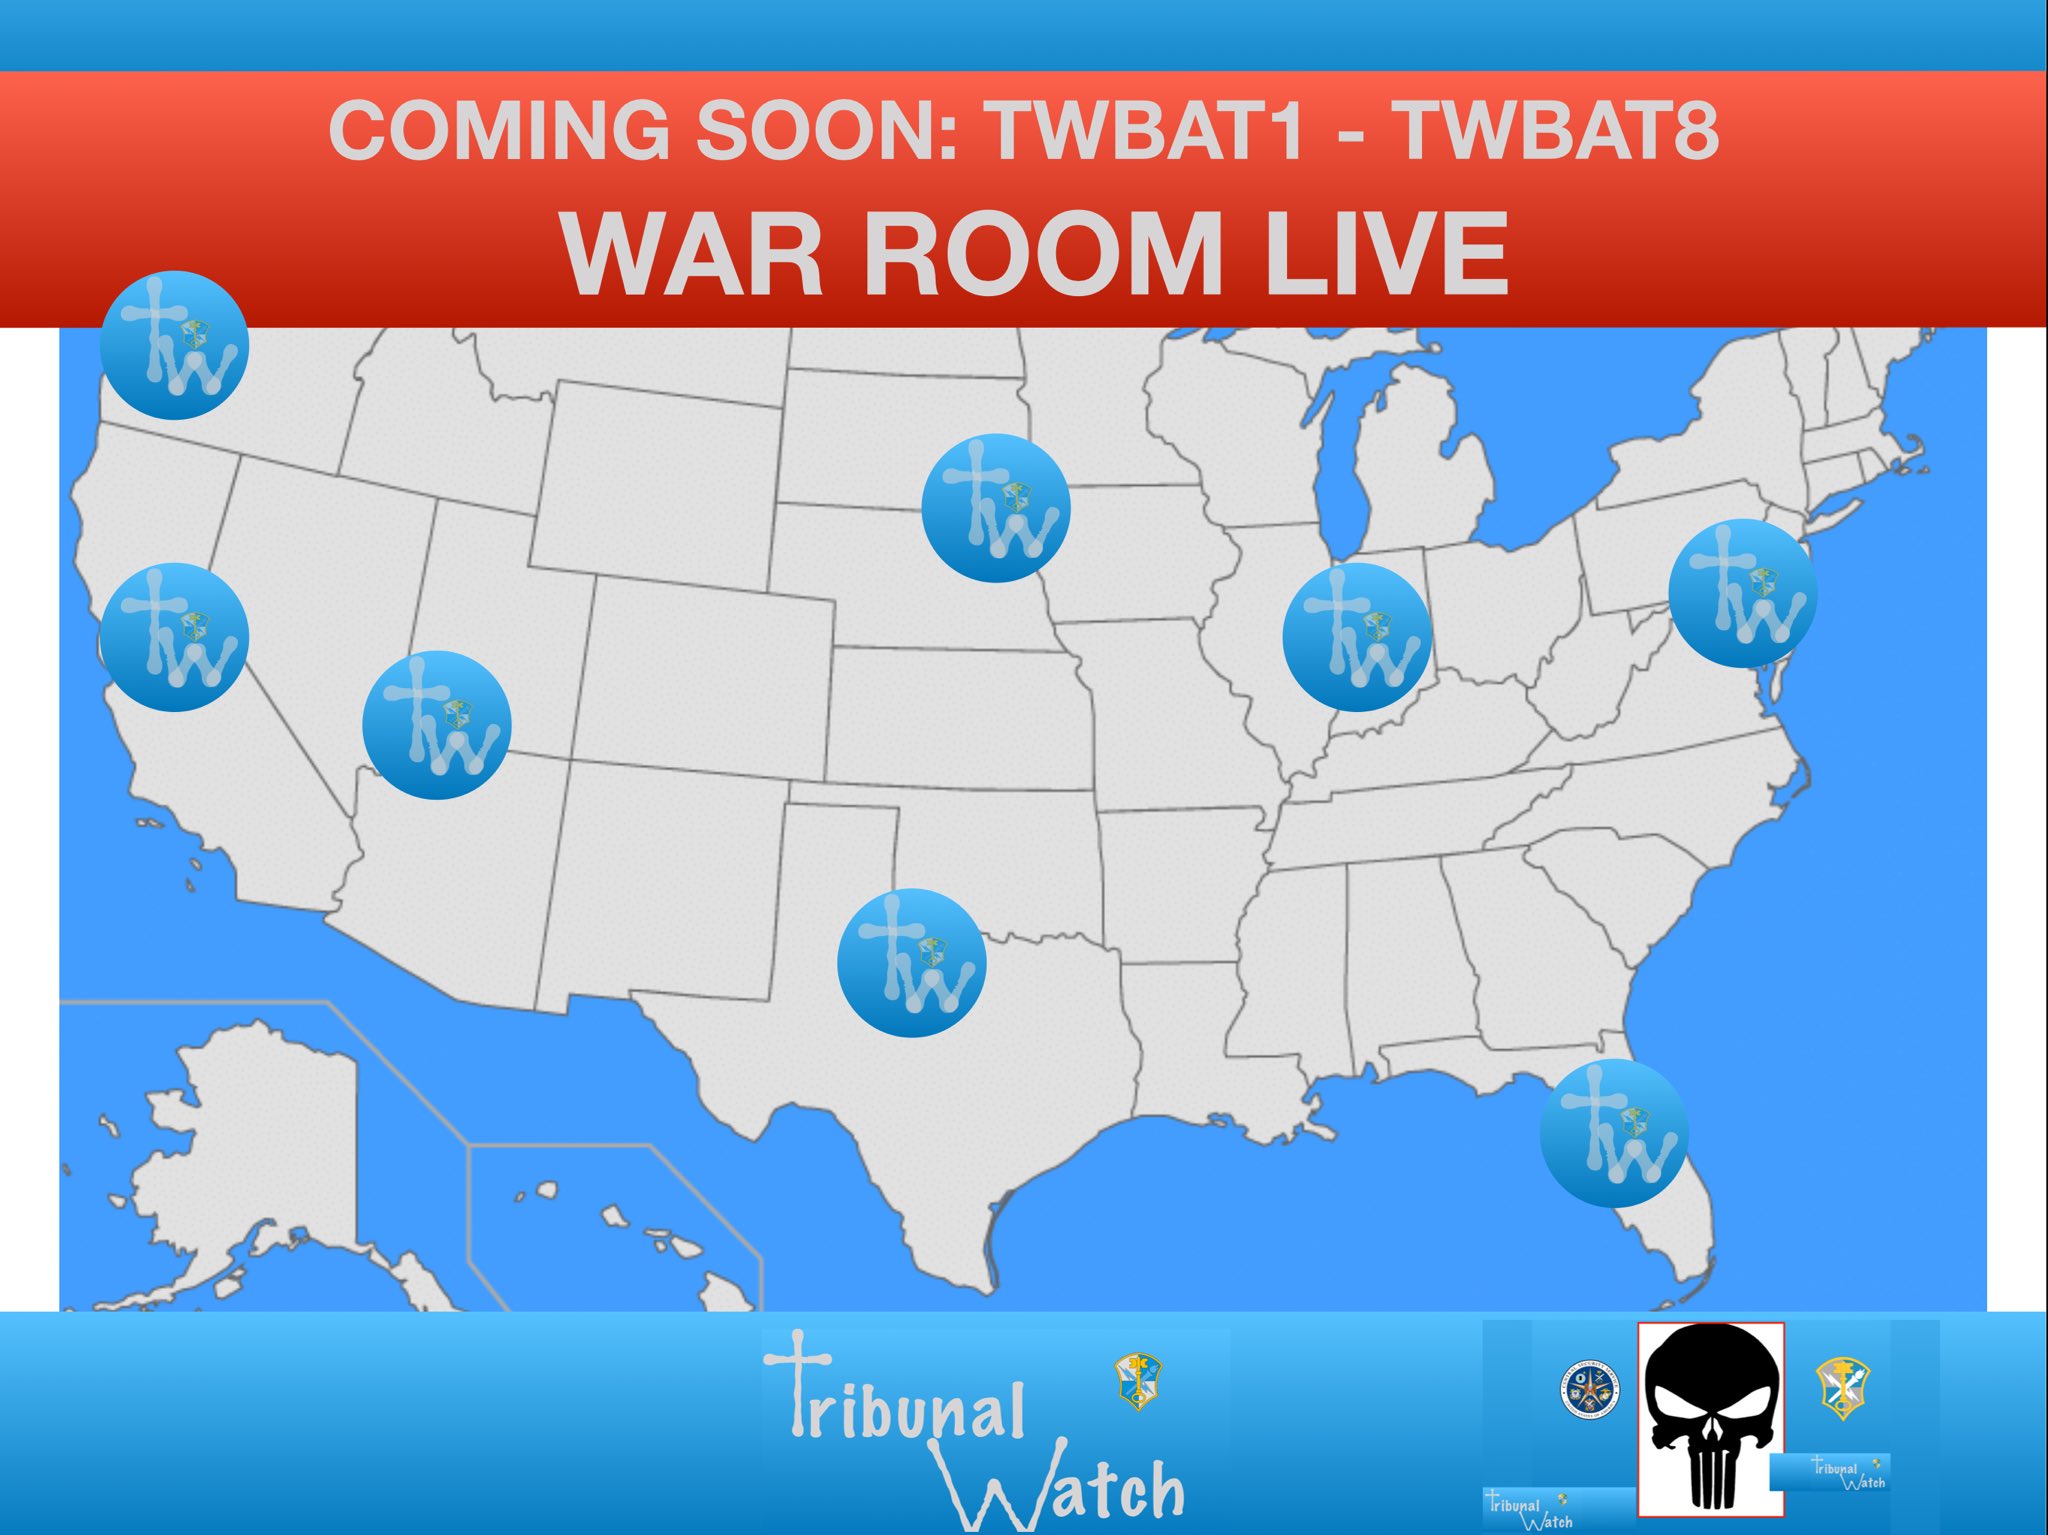 TribunalWatch on Twitter: "ITS SHOWTIMEGLOVES OFF!WE ARE GOING IN! *If/when we GO OFFLINE PLZ START:@tribunal_watch2 - @tribunal_watch2 - @tribunal_watch3WE WILL FIND AND CONNECT MEME CONTENT AND PICK RIGHT BACK UP!WONT STOP...CANNOT STOP!#DIGITALARMY PREP FOR D-DAY INVASION....ITS GO TIME!… https://t.co/tHzRmeejQI"